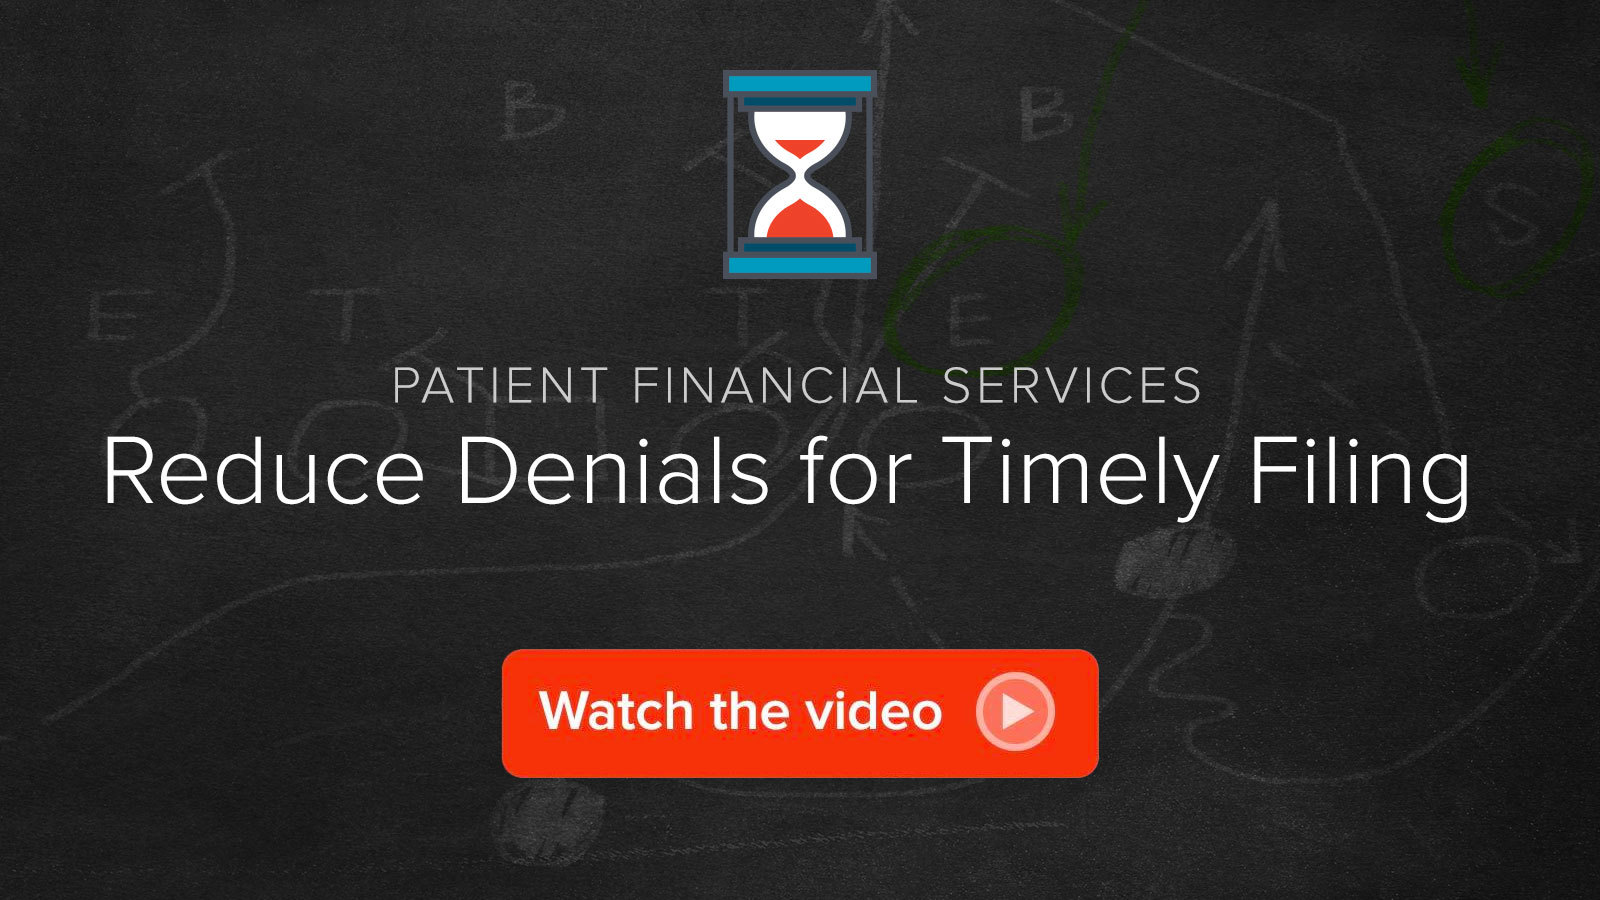 Watch the Reduce Denials for Timely Filing video